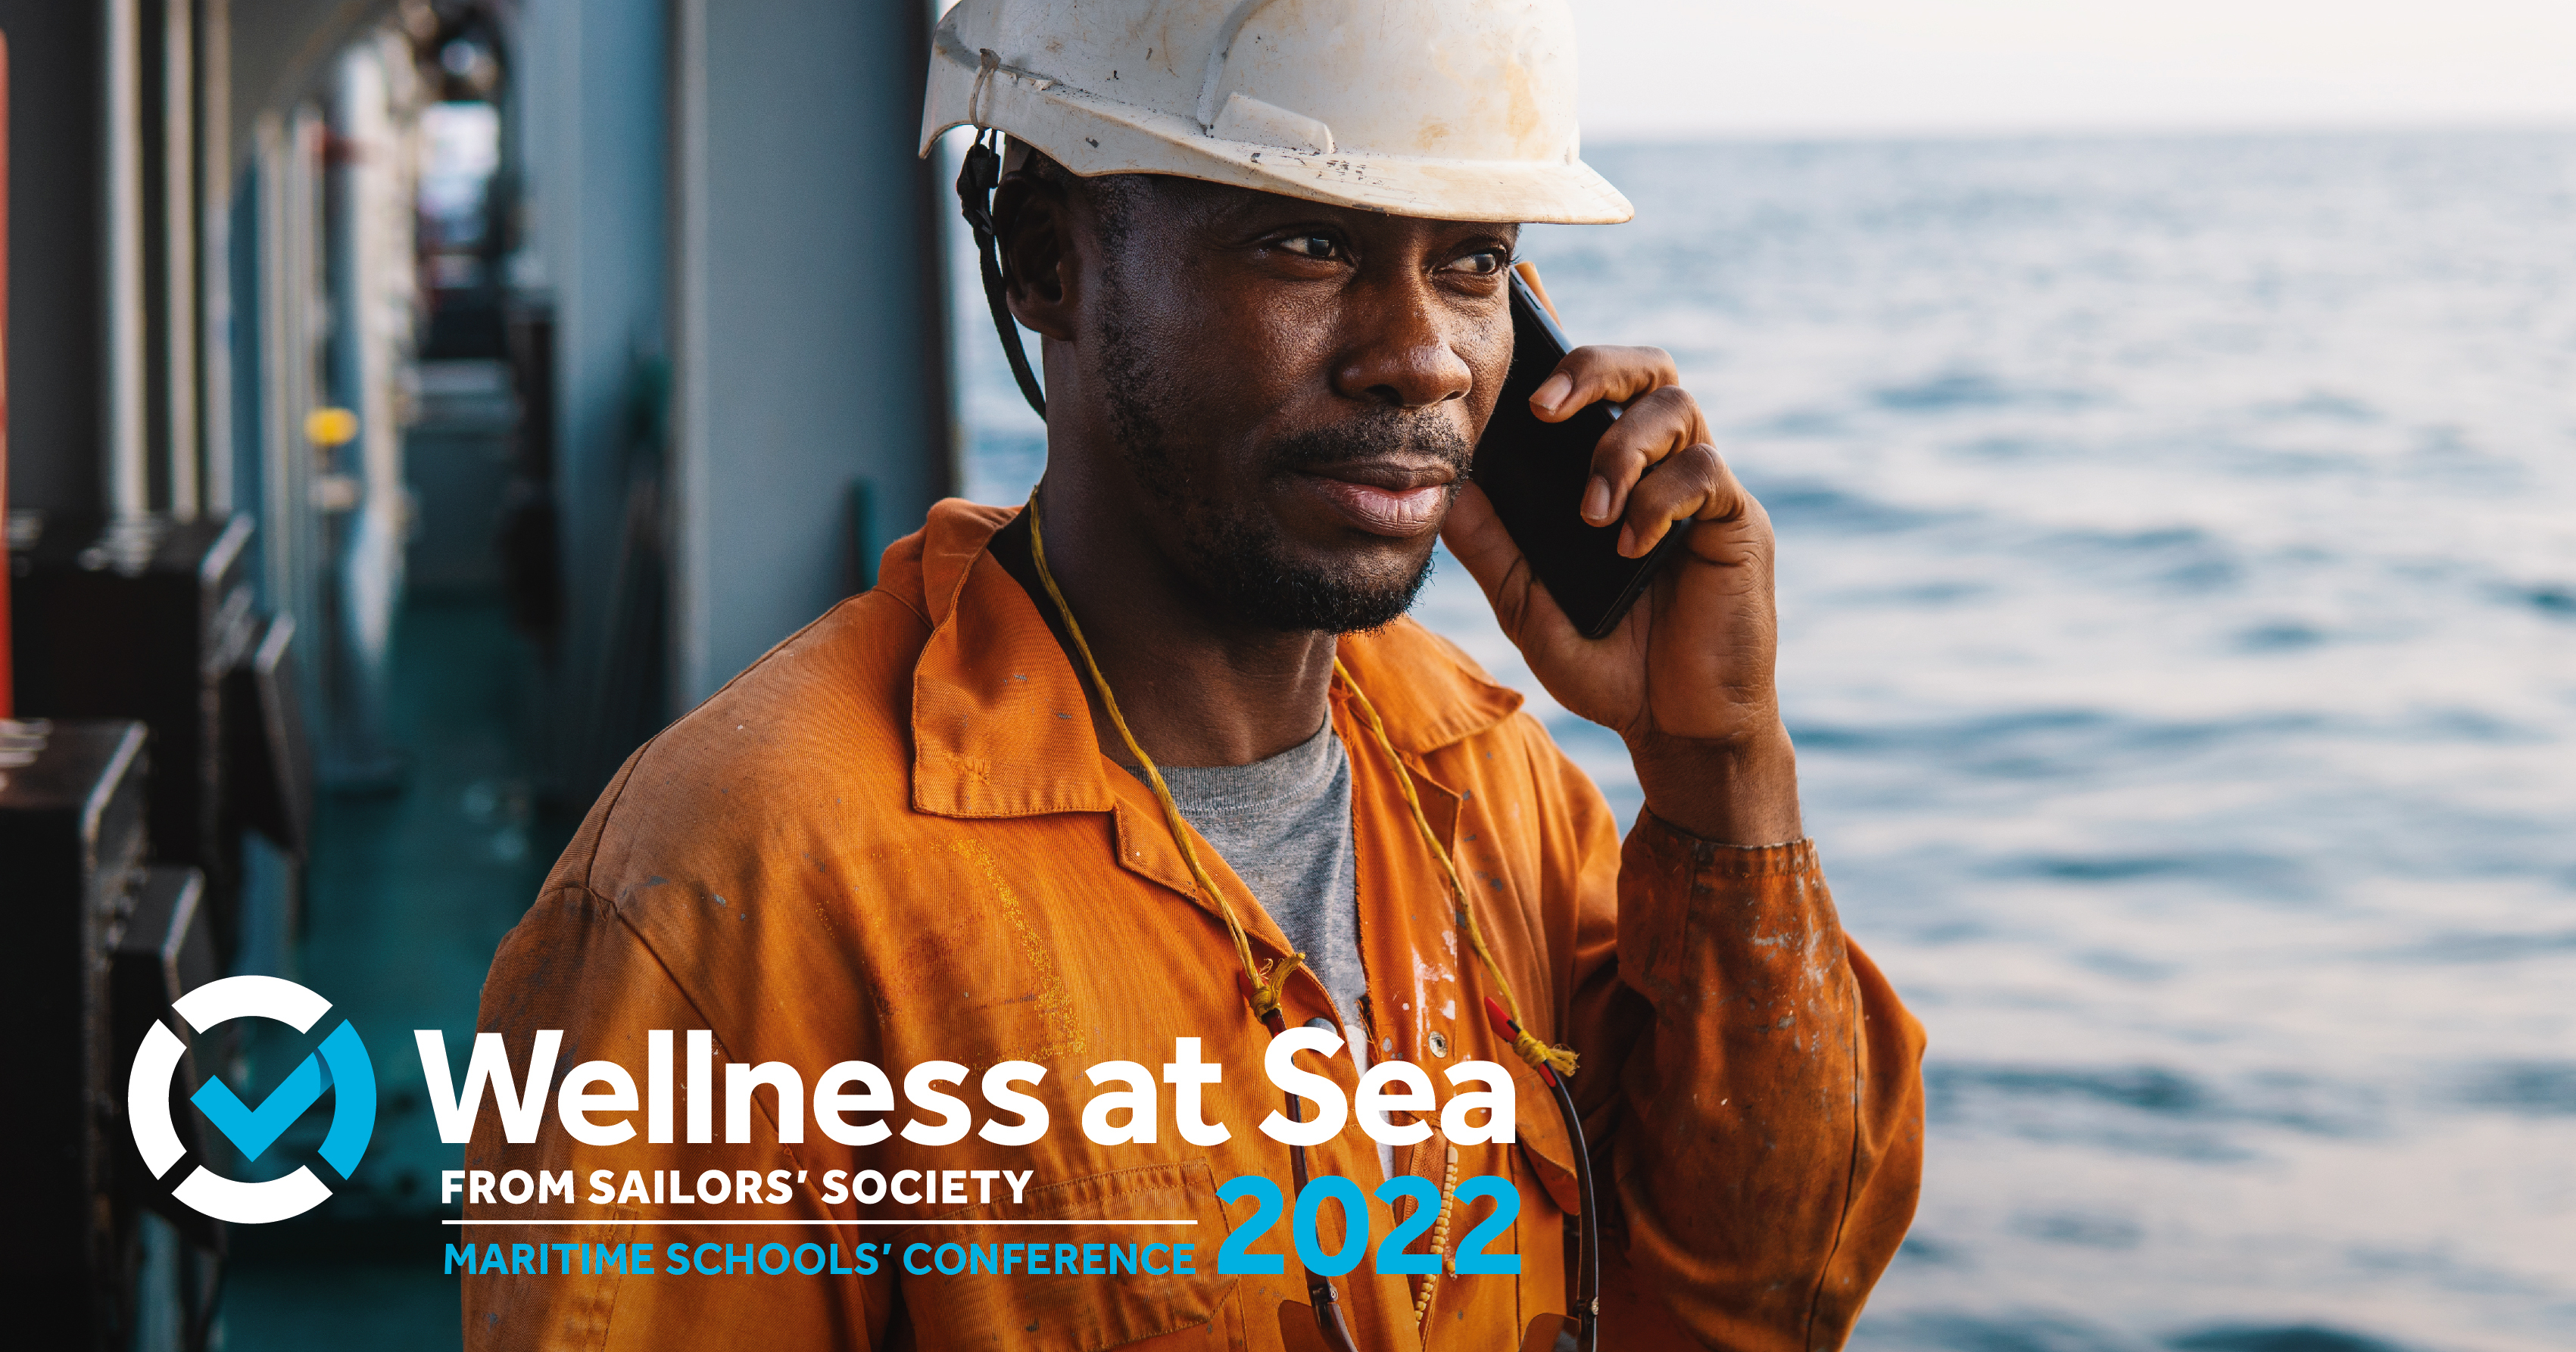 The first African Maritime Schools' Wellness Conference is a huge success